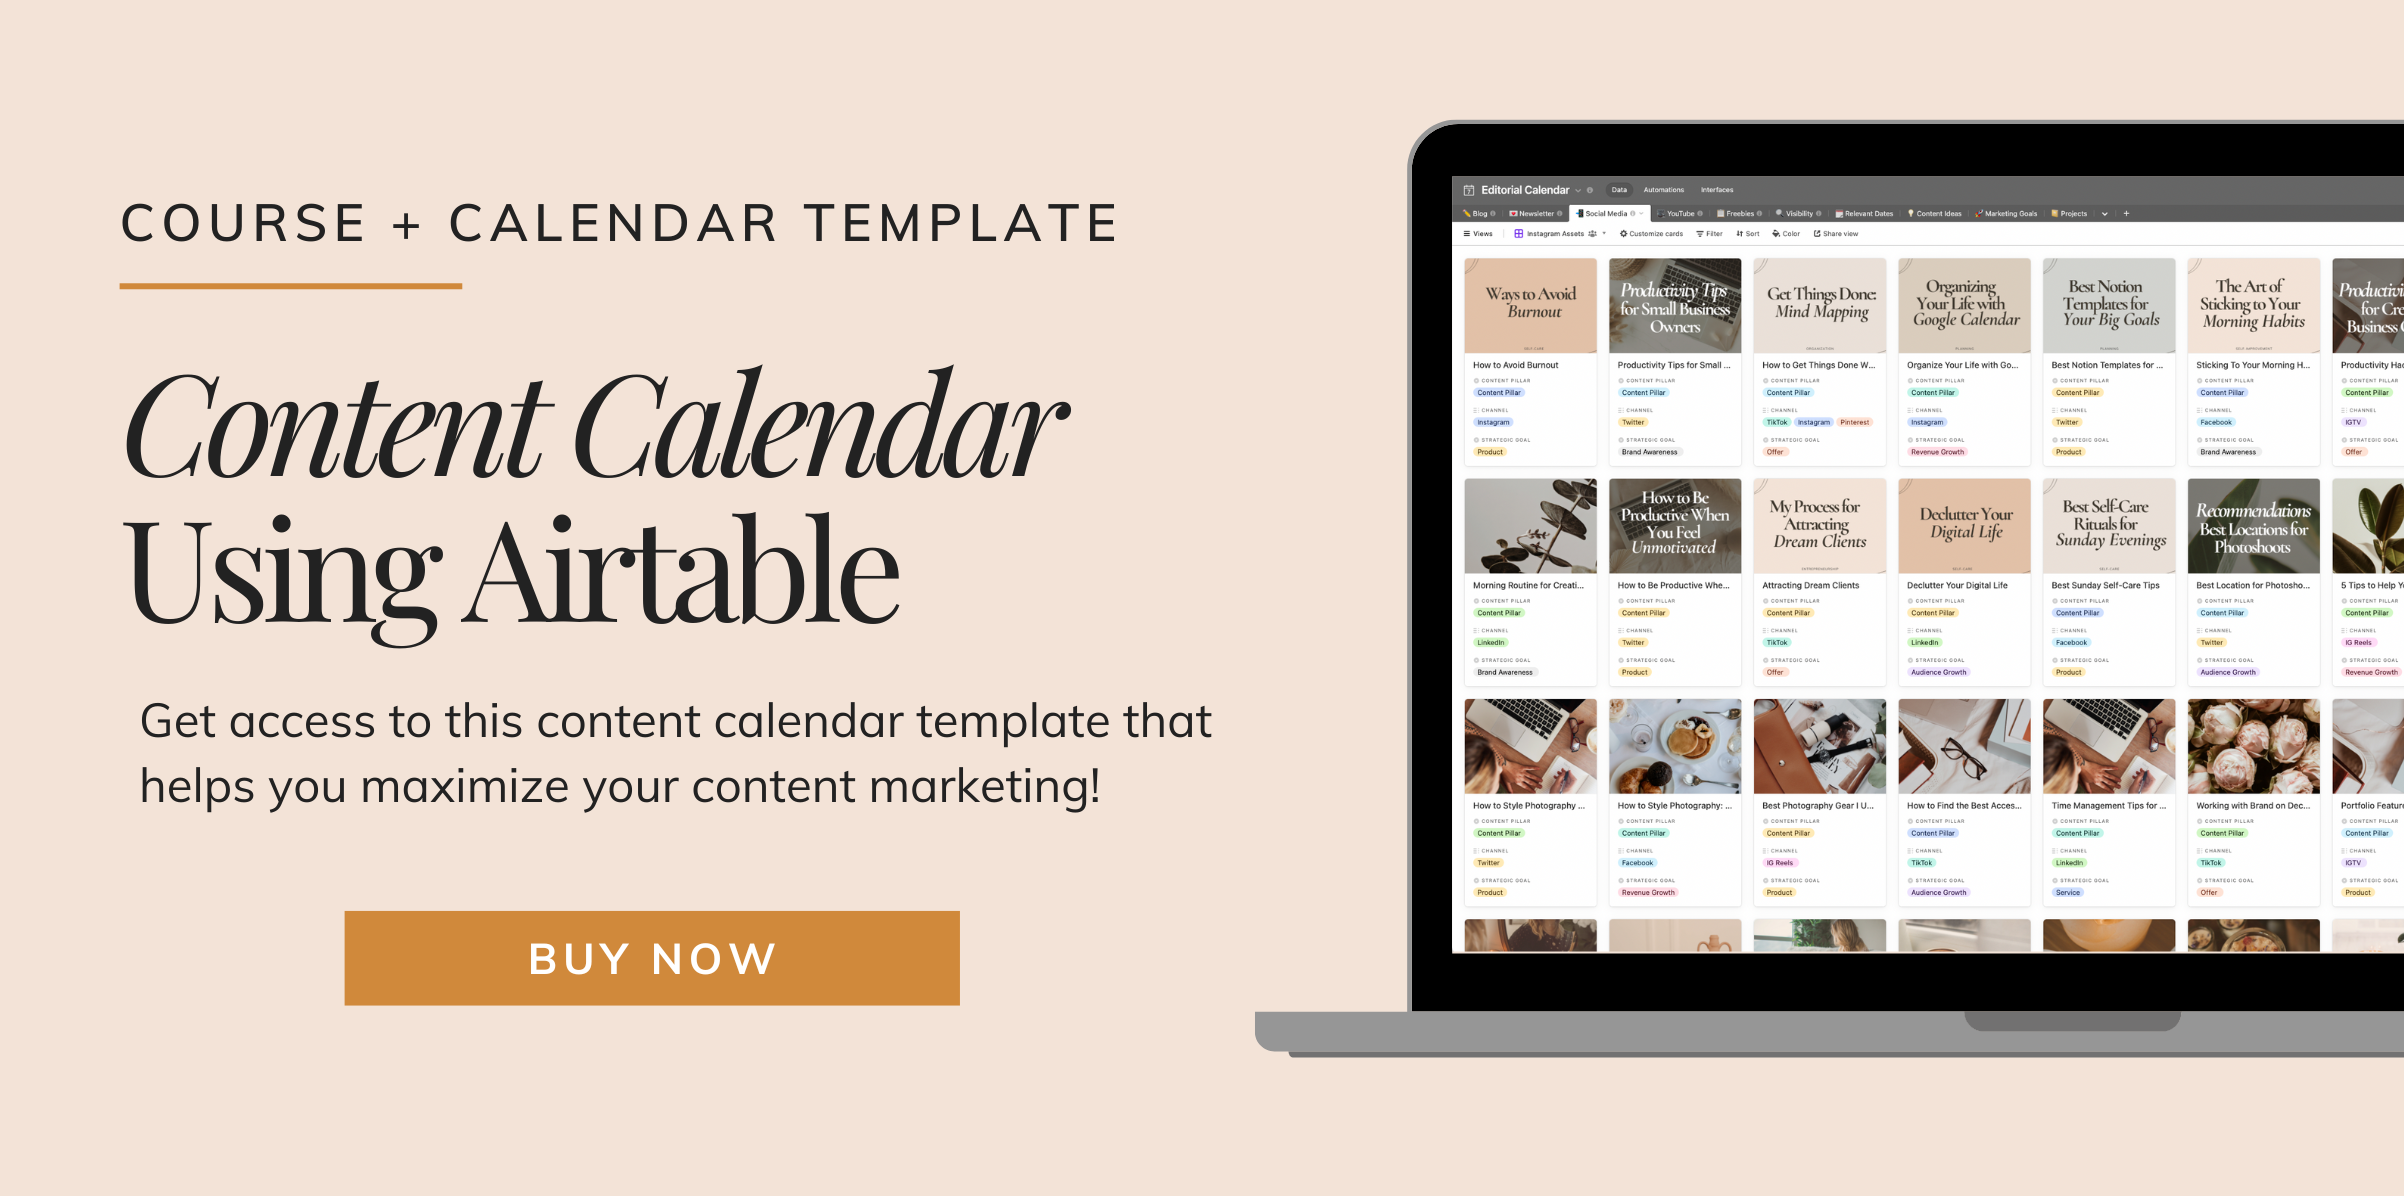 This calendar has the foundational elements built into it that will help you be more strategic with the content and marketing activities you’re focusing on.